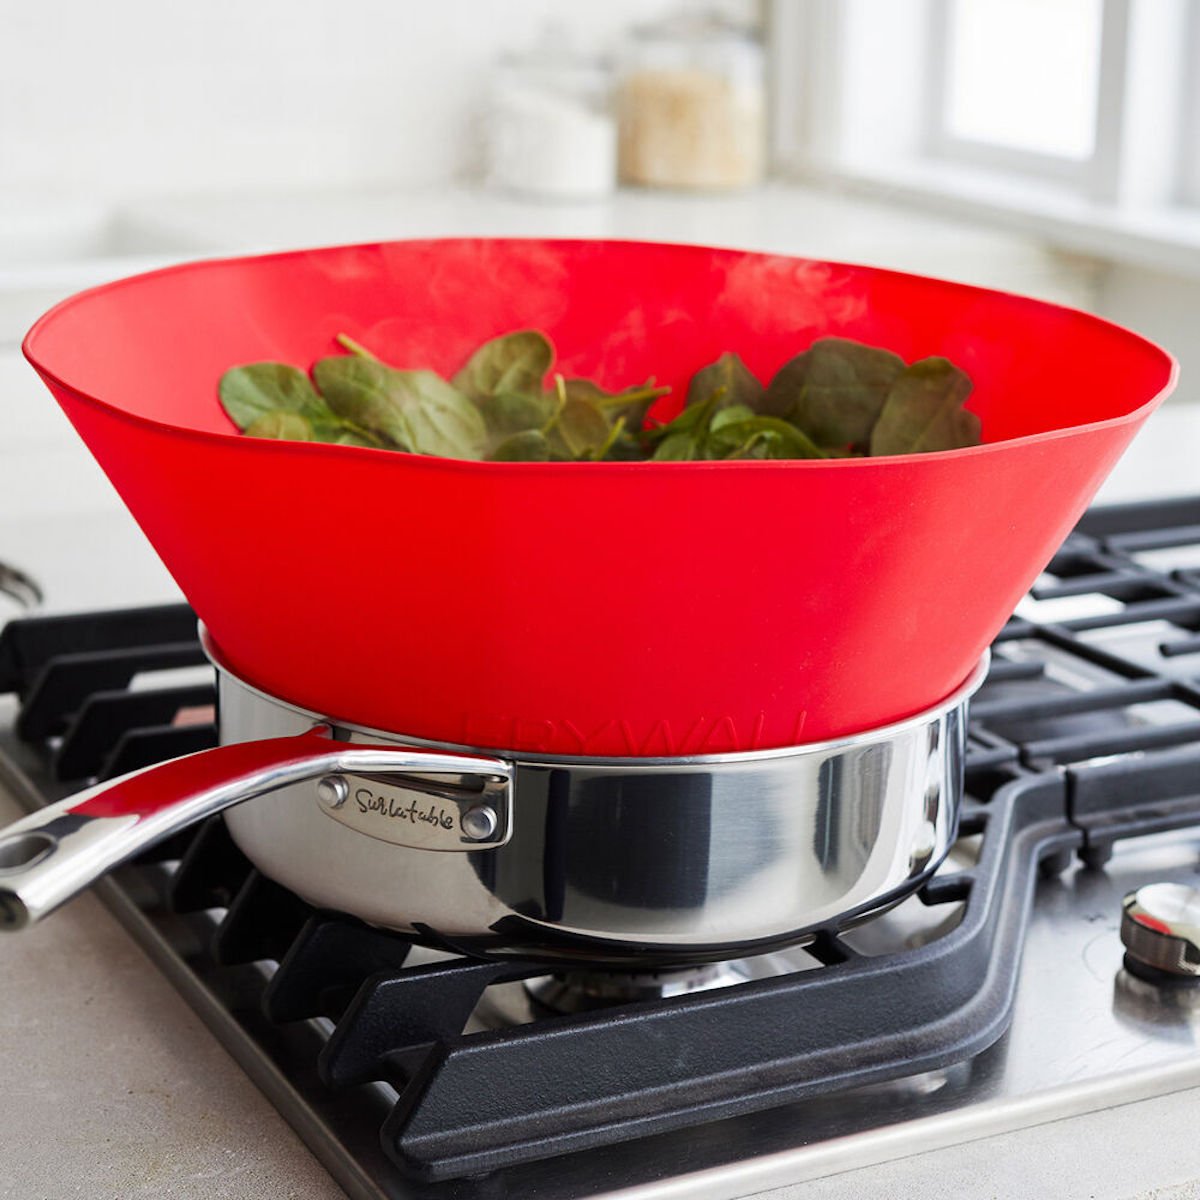 10 Awesome Kitchen Gadgets - Review 